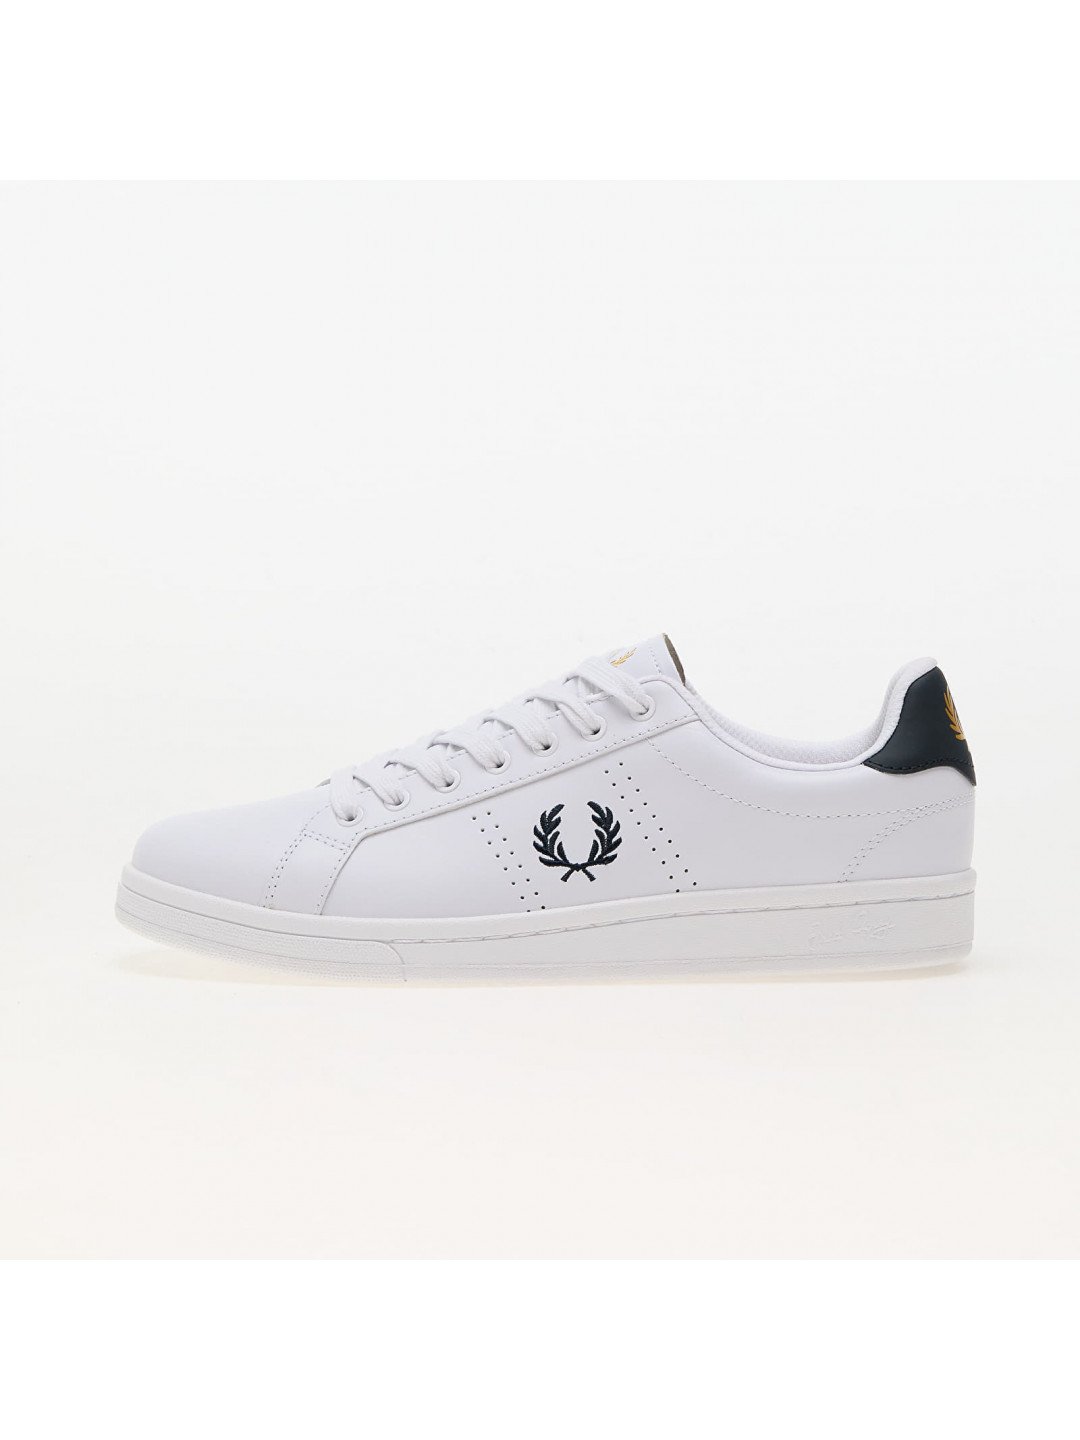 FRED PERRY B721 Leather White Navy